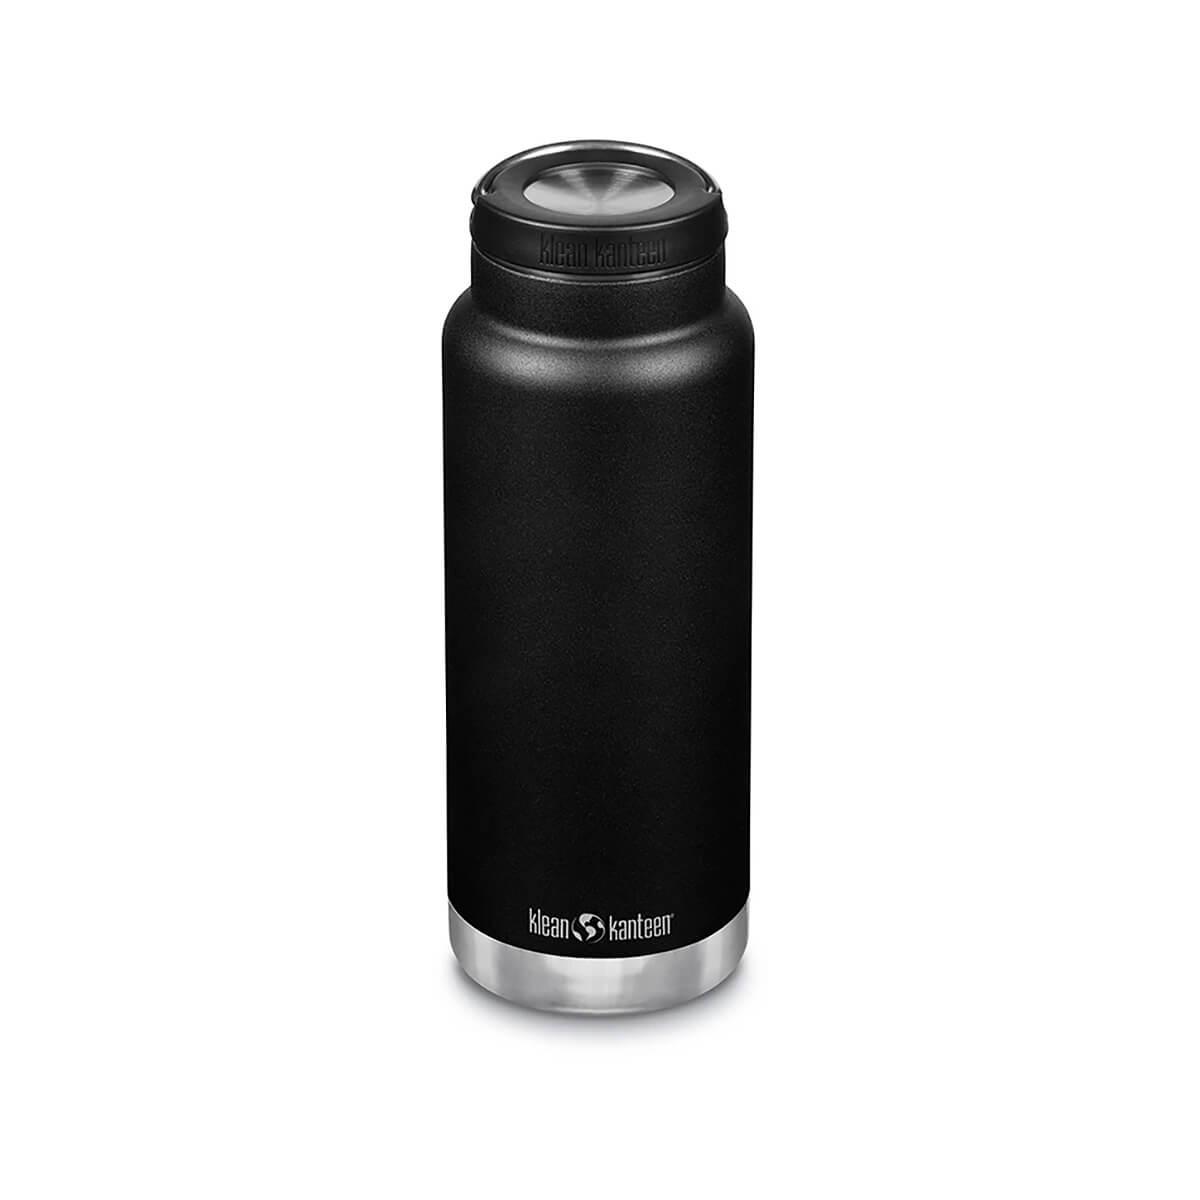 Klean Kanteen 32oz Insulated TKWide Bottle with Chug Cap